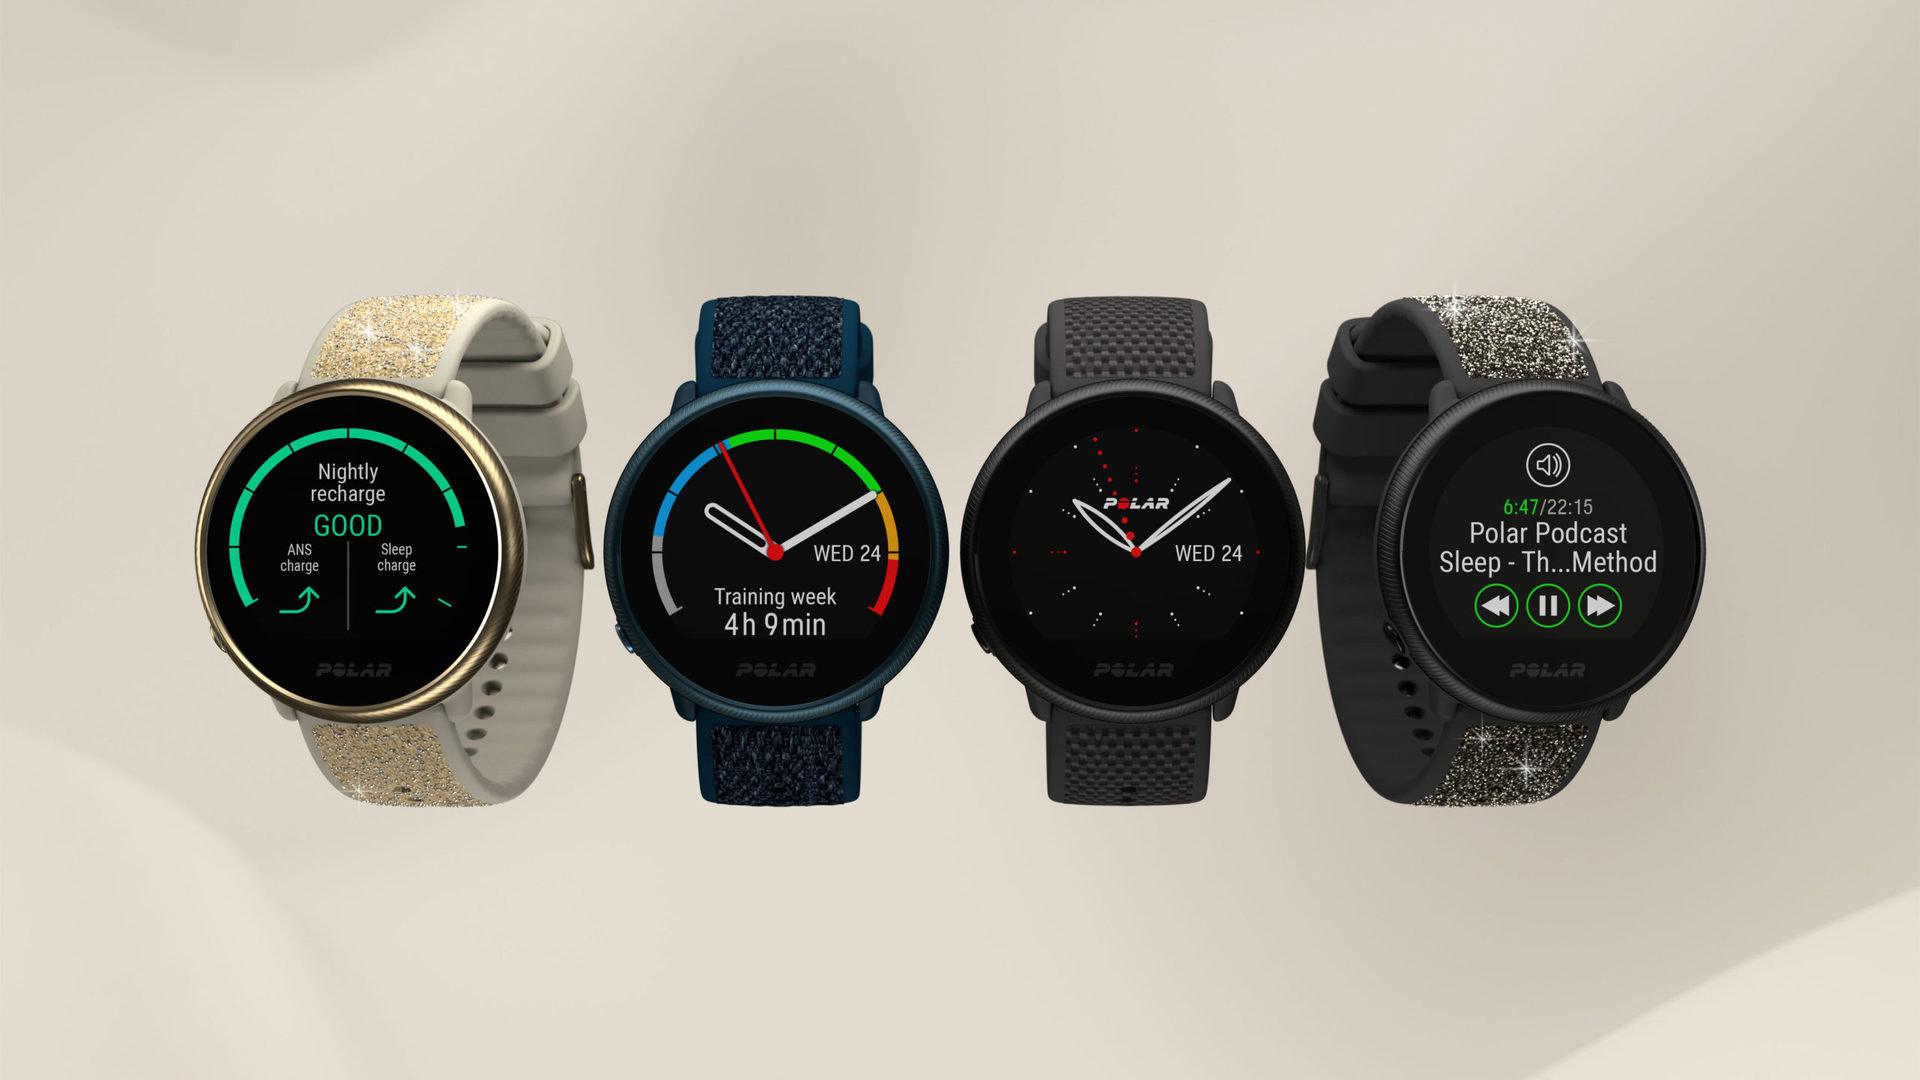 A group image of the Polar Ignite 2, the best mulitsport Polar watches, shows multiple band options and colors.